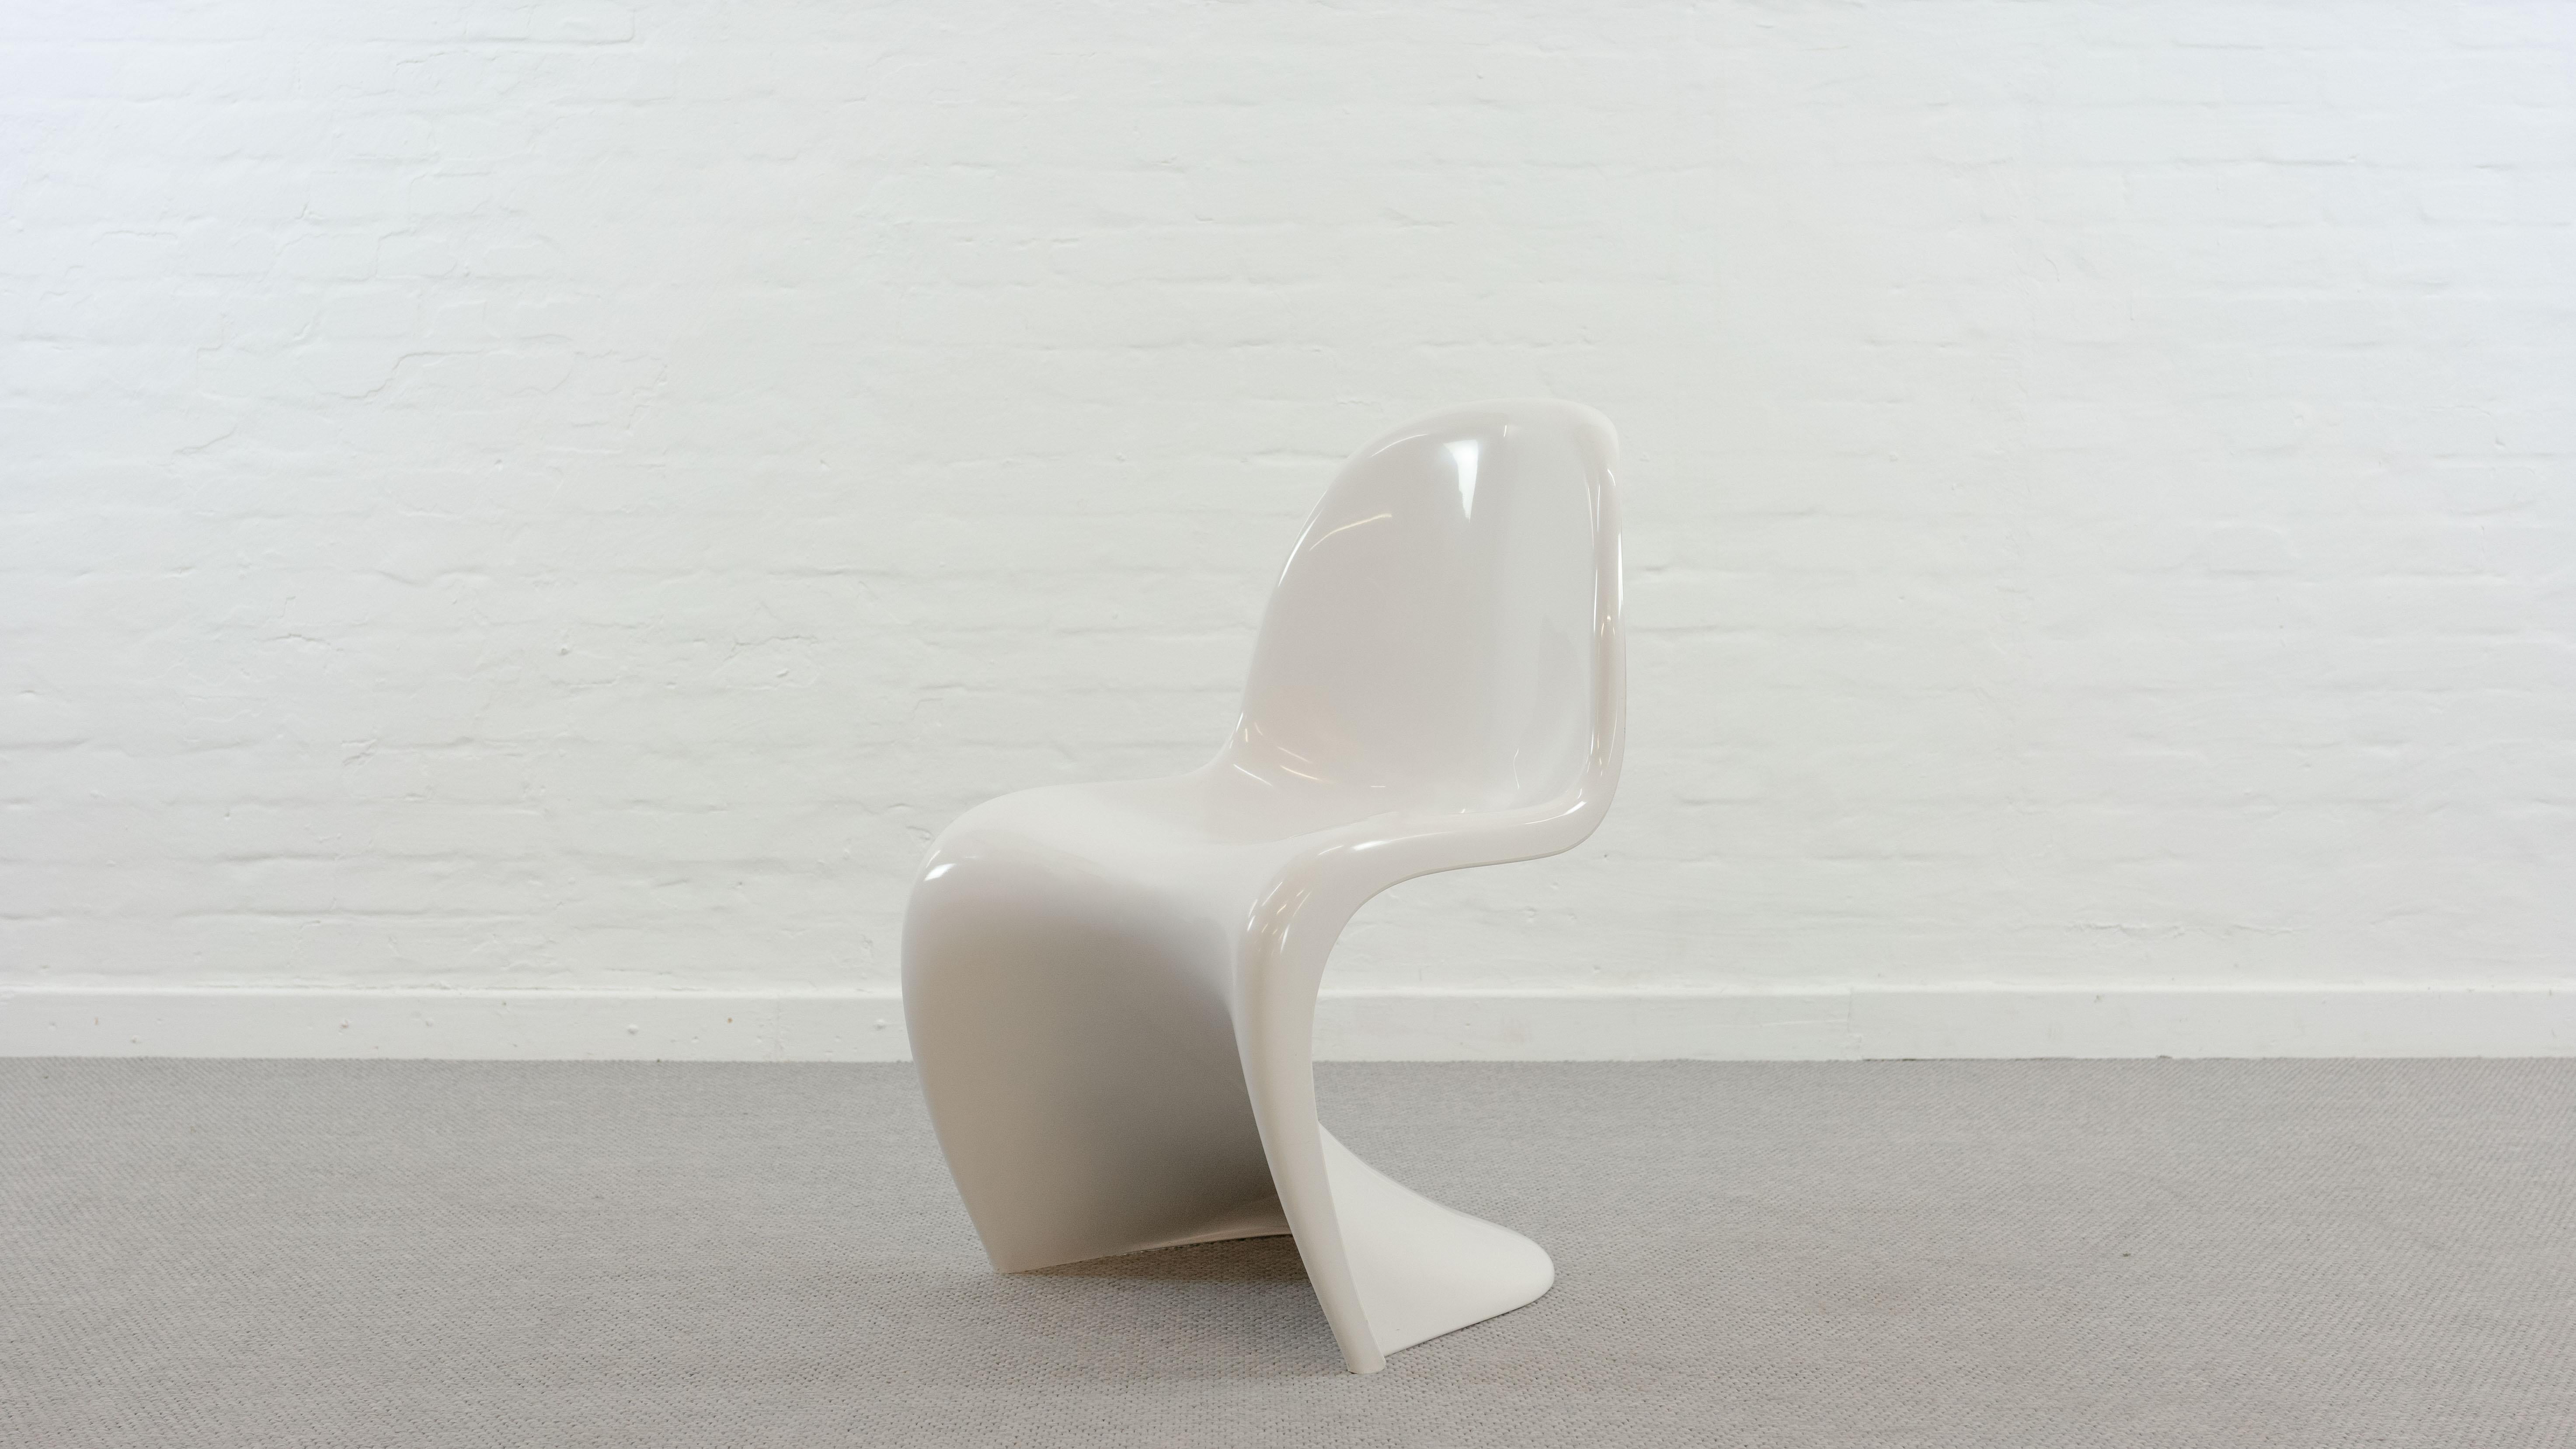 Panton S-Chair, designed by Verner Panton for Hermann Miller / Fehlbaum. Color: white. The chair is from the 2nd production run from 1970 onwards in thermoplastic luran-s with reinforcement ribs underneath. Marked with manufacturers logo and